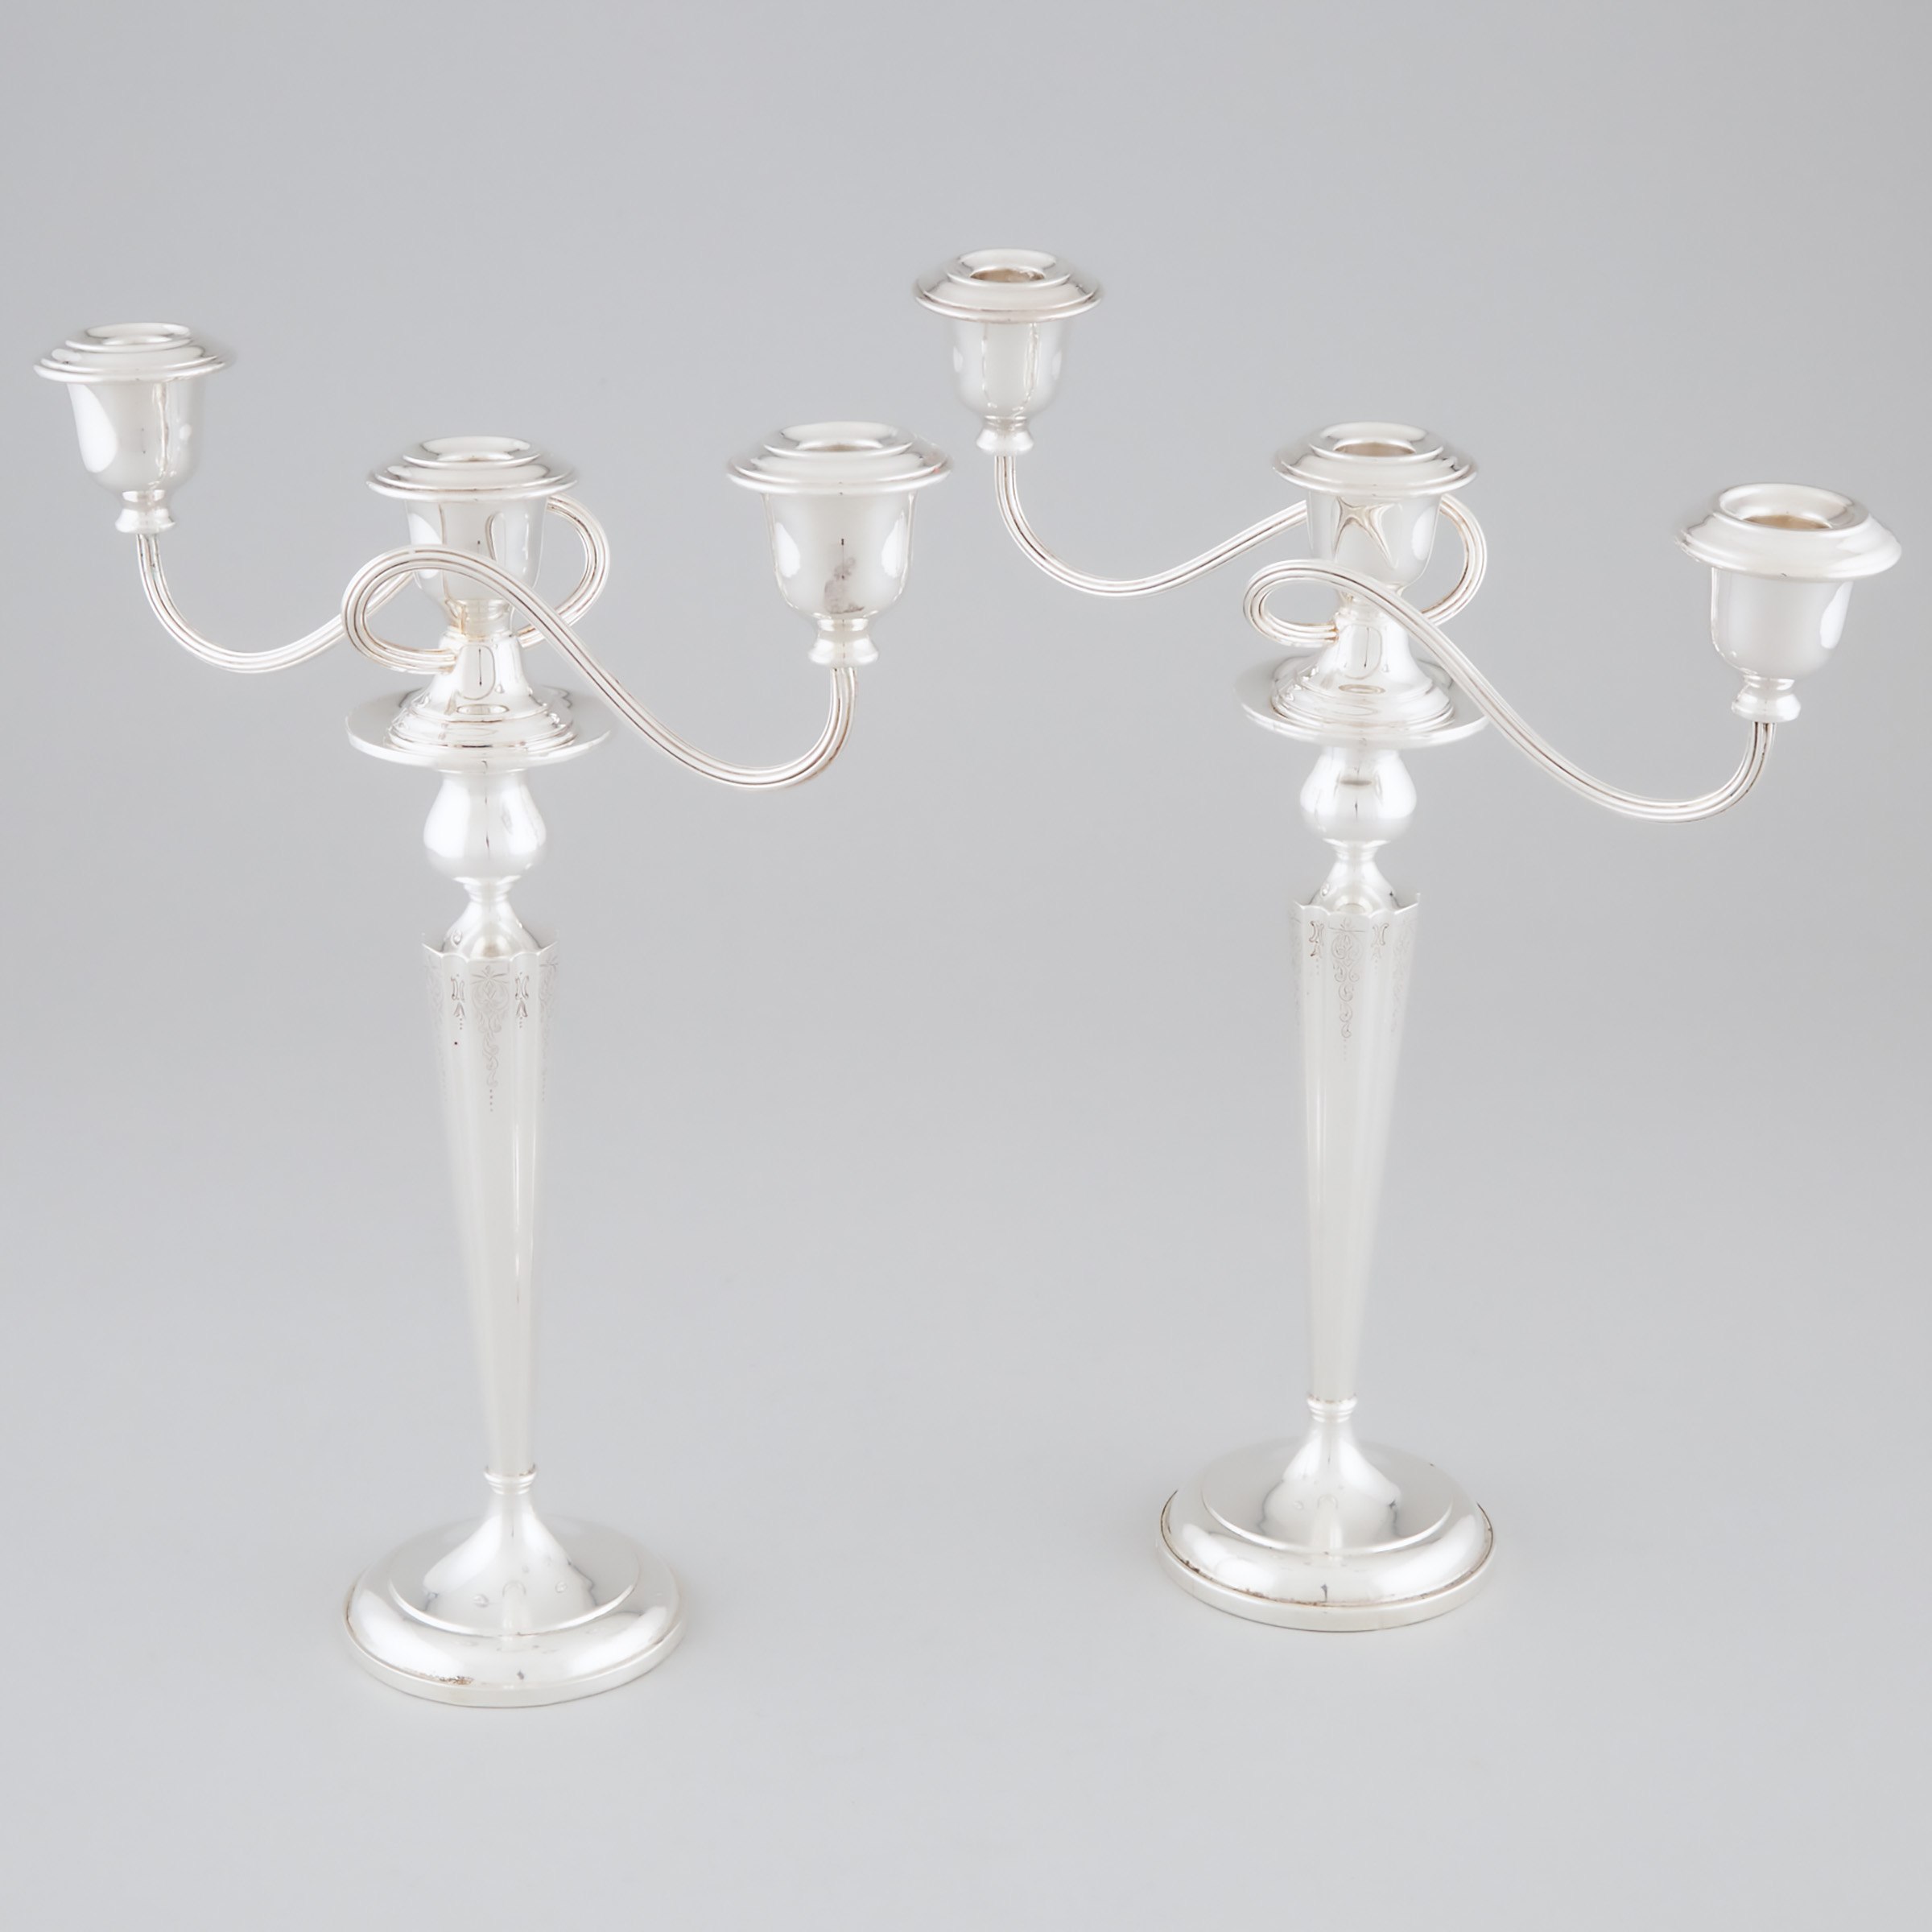 Pair of American Silver Candlesticks Together with a Pair of Three-Light Branches, 20th century